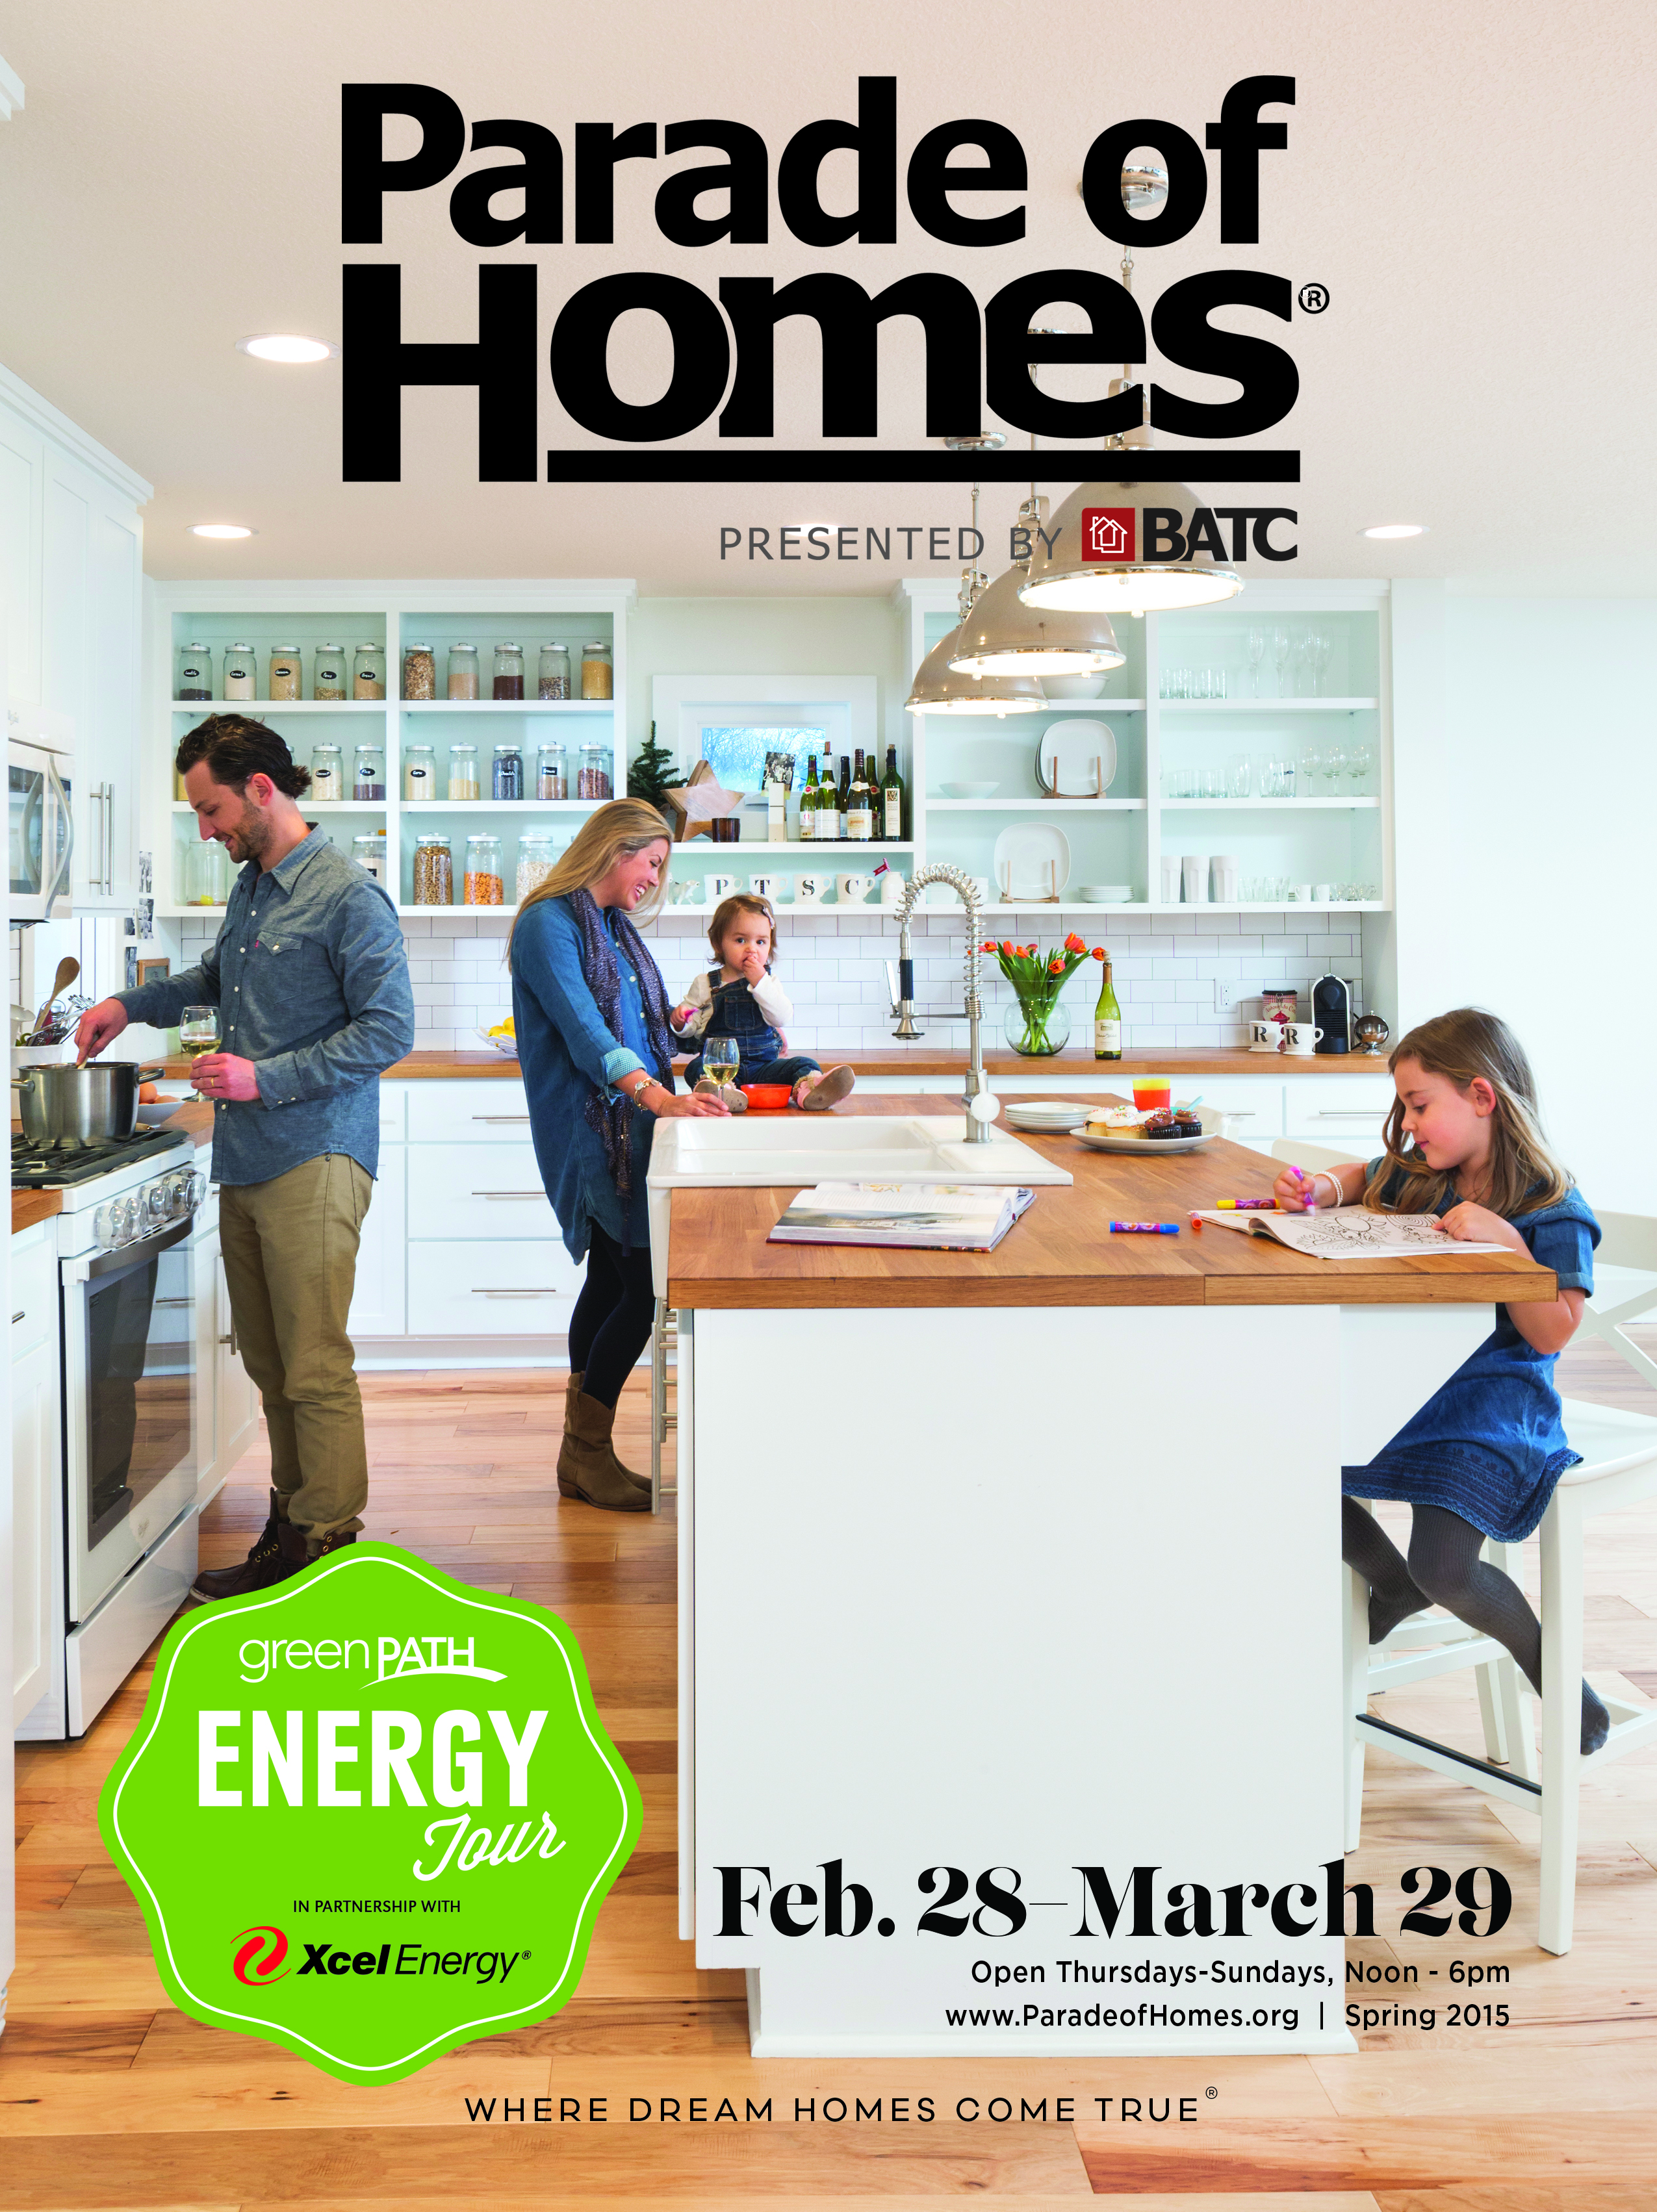 Image for Facts About the Spring 2015 Parade of Homes